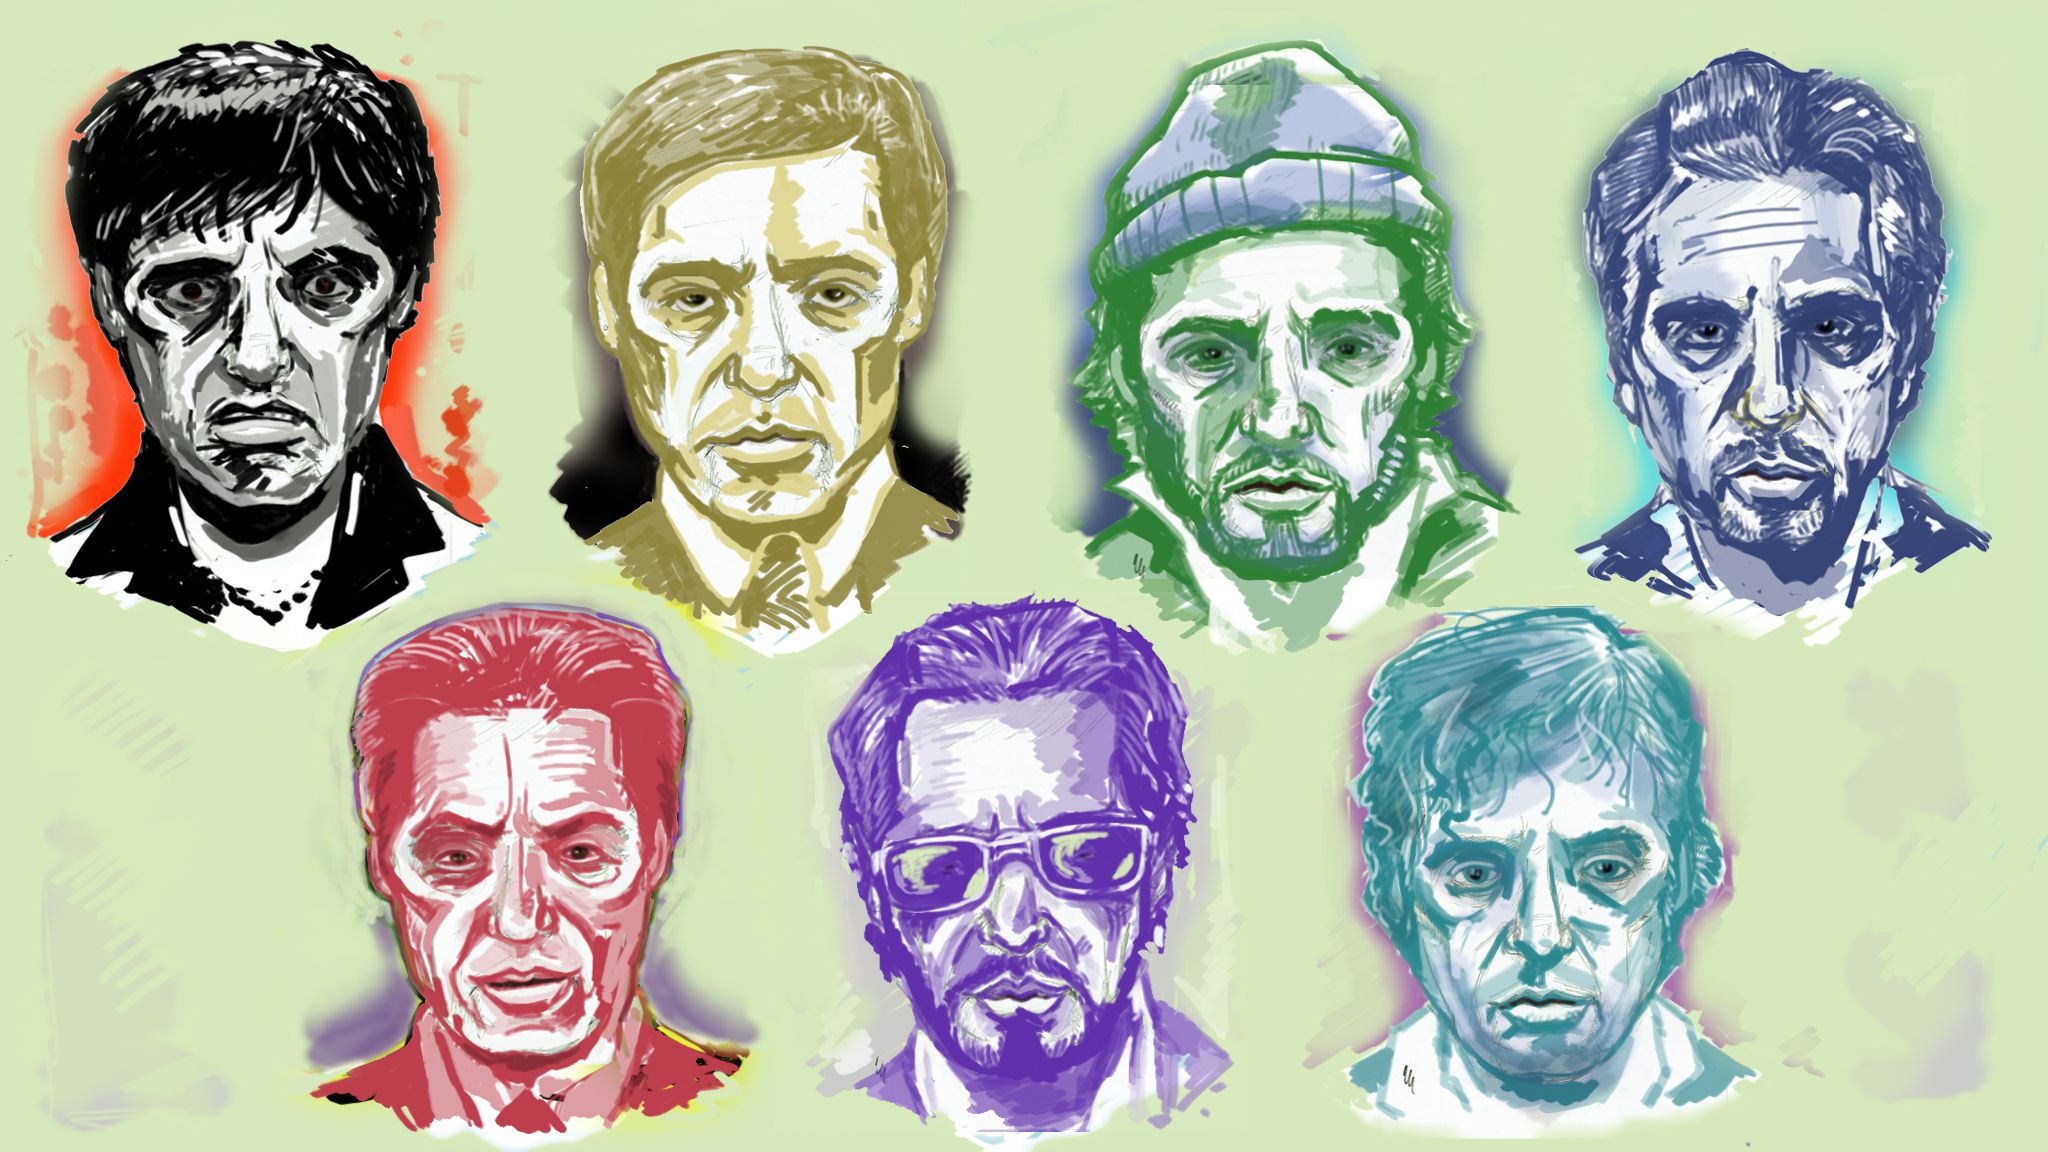 Illustrations of film characters played by Al Pacino